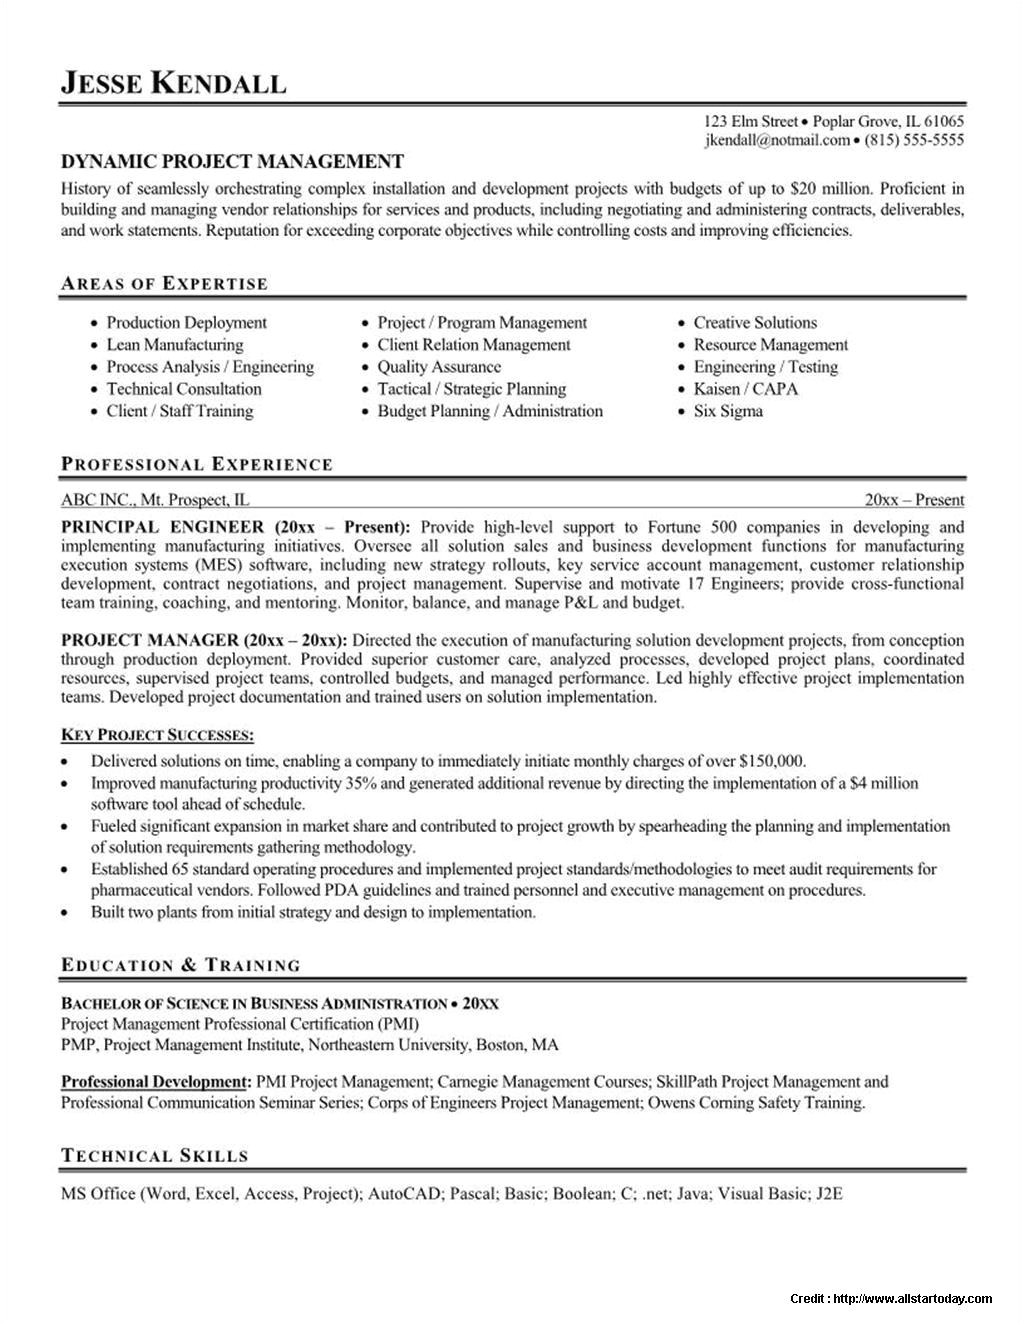 sample resume for project manager in manufacturing